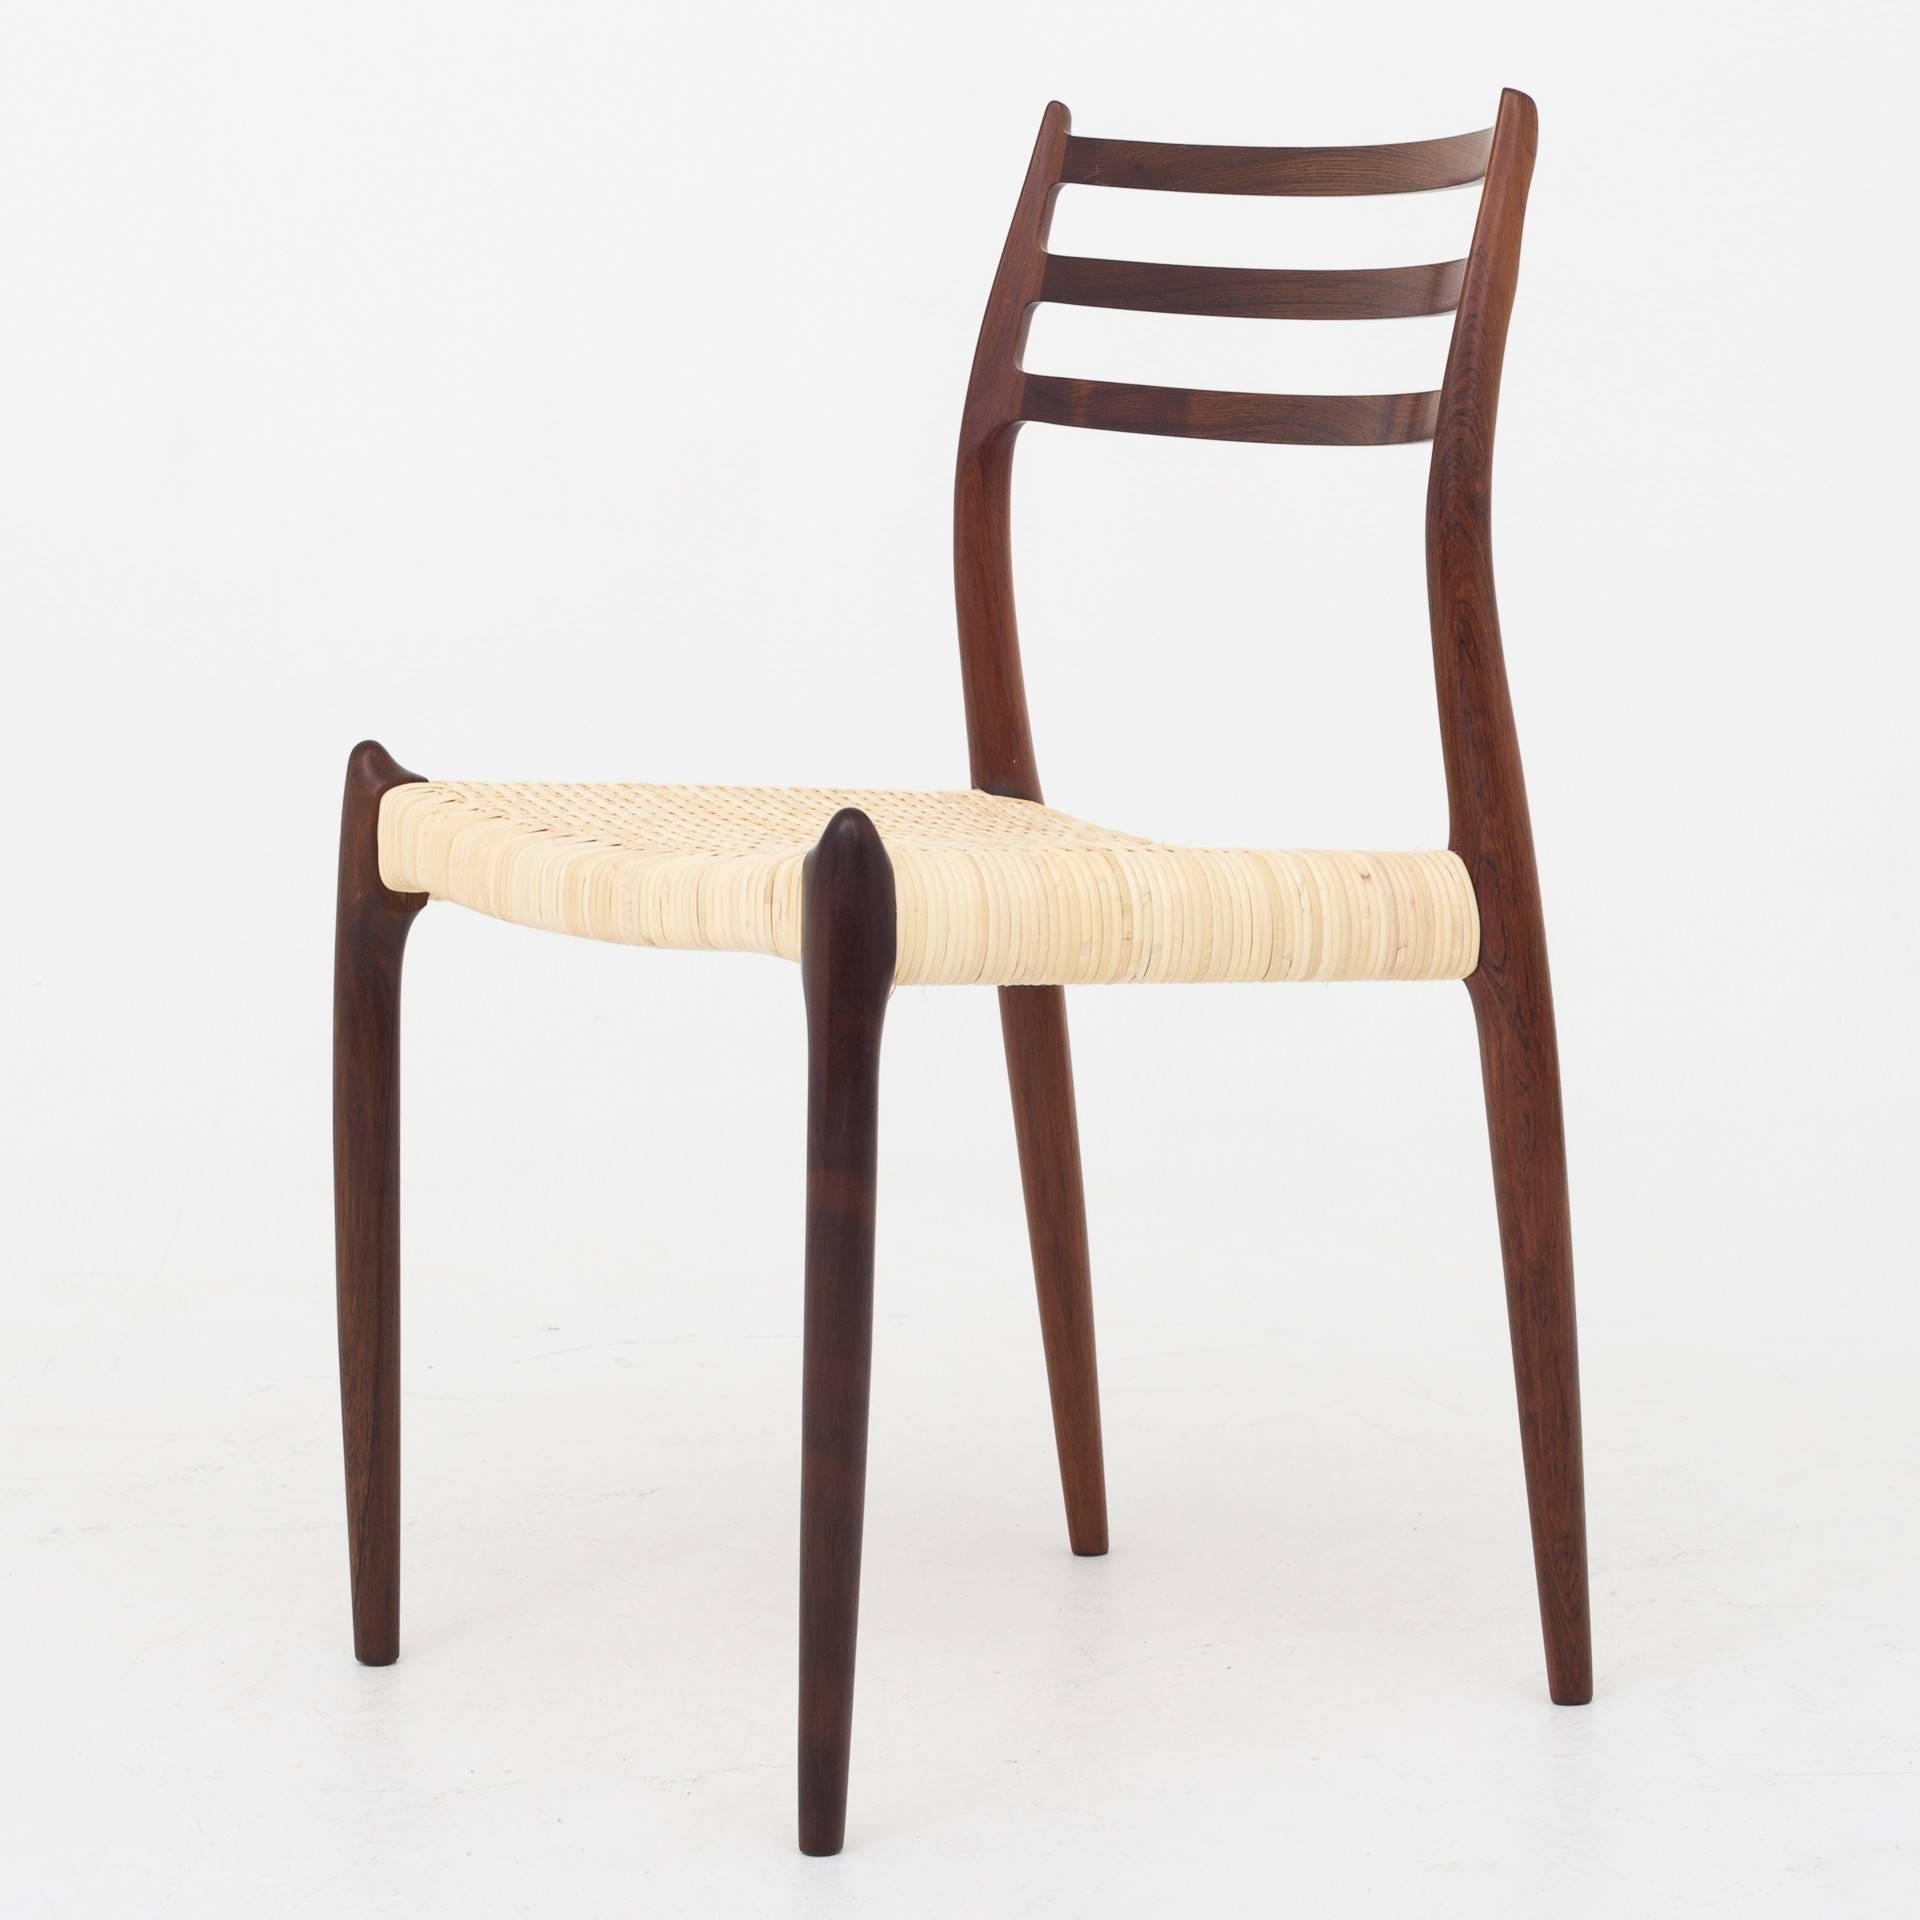 Seat of four no 78, dining chair in rosewood with new cane seat. More pieces in stock. Maker J. L. Møller.